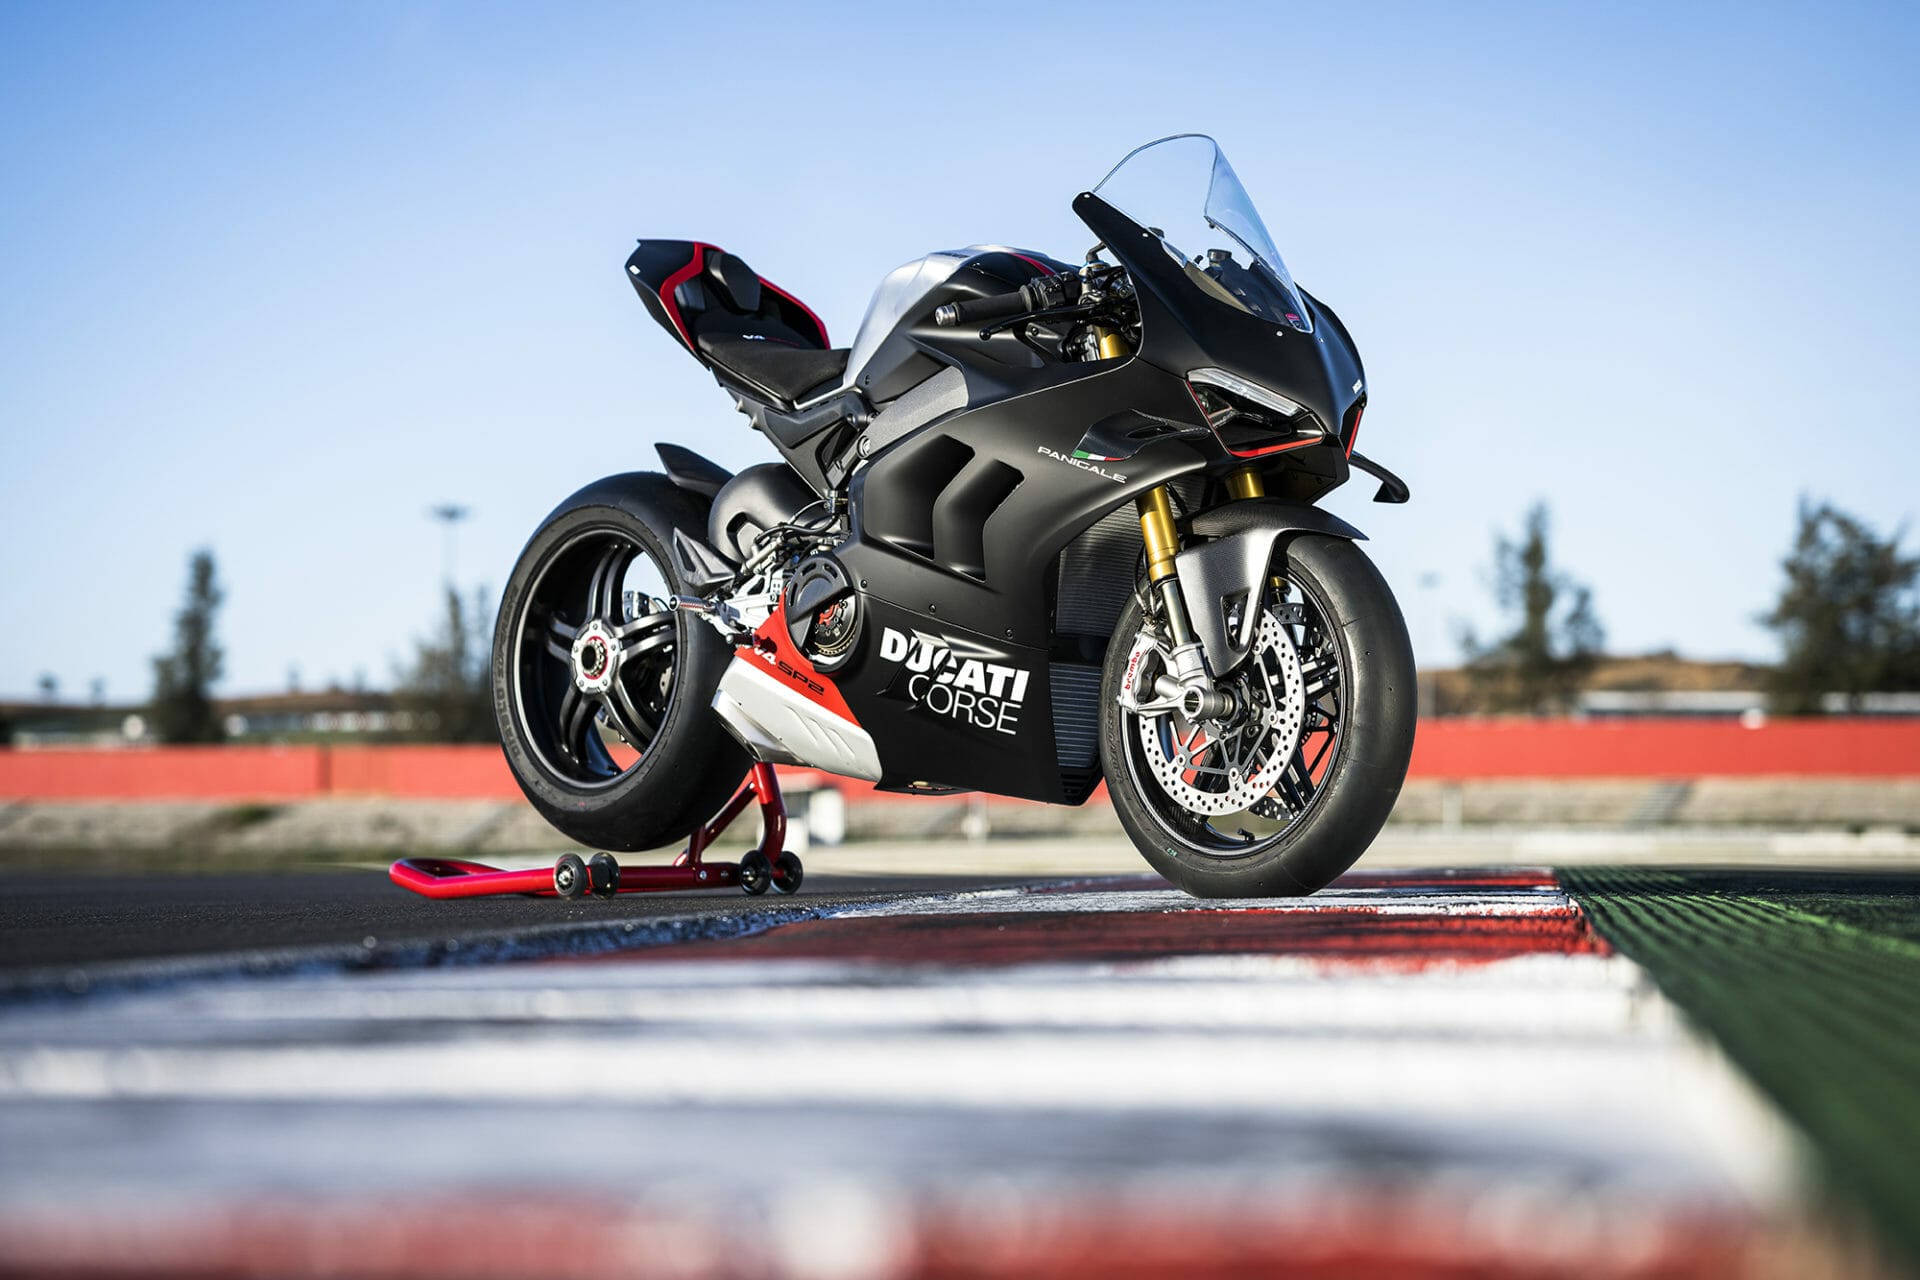 Ducati Panigale V4 SP2 – The Ultimate Racetrack Machine
- also in the MOTORCYCLES.NEWS APP